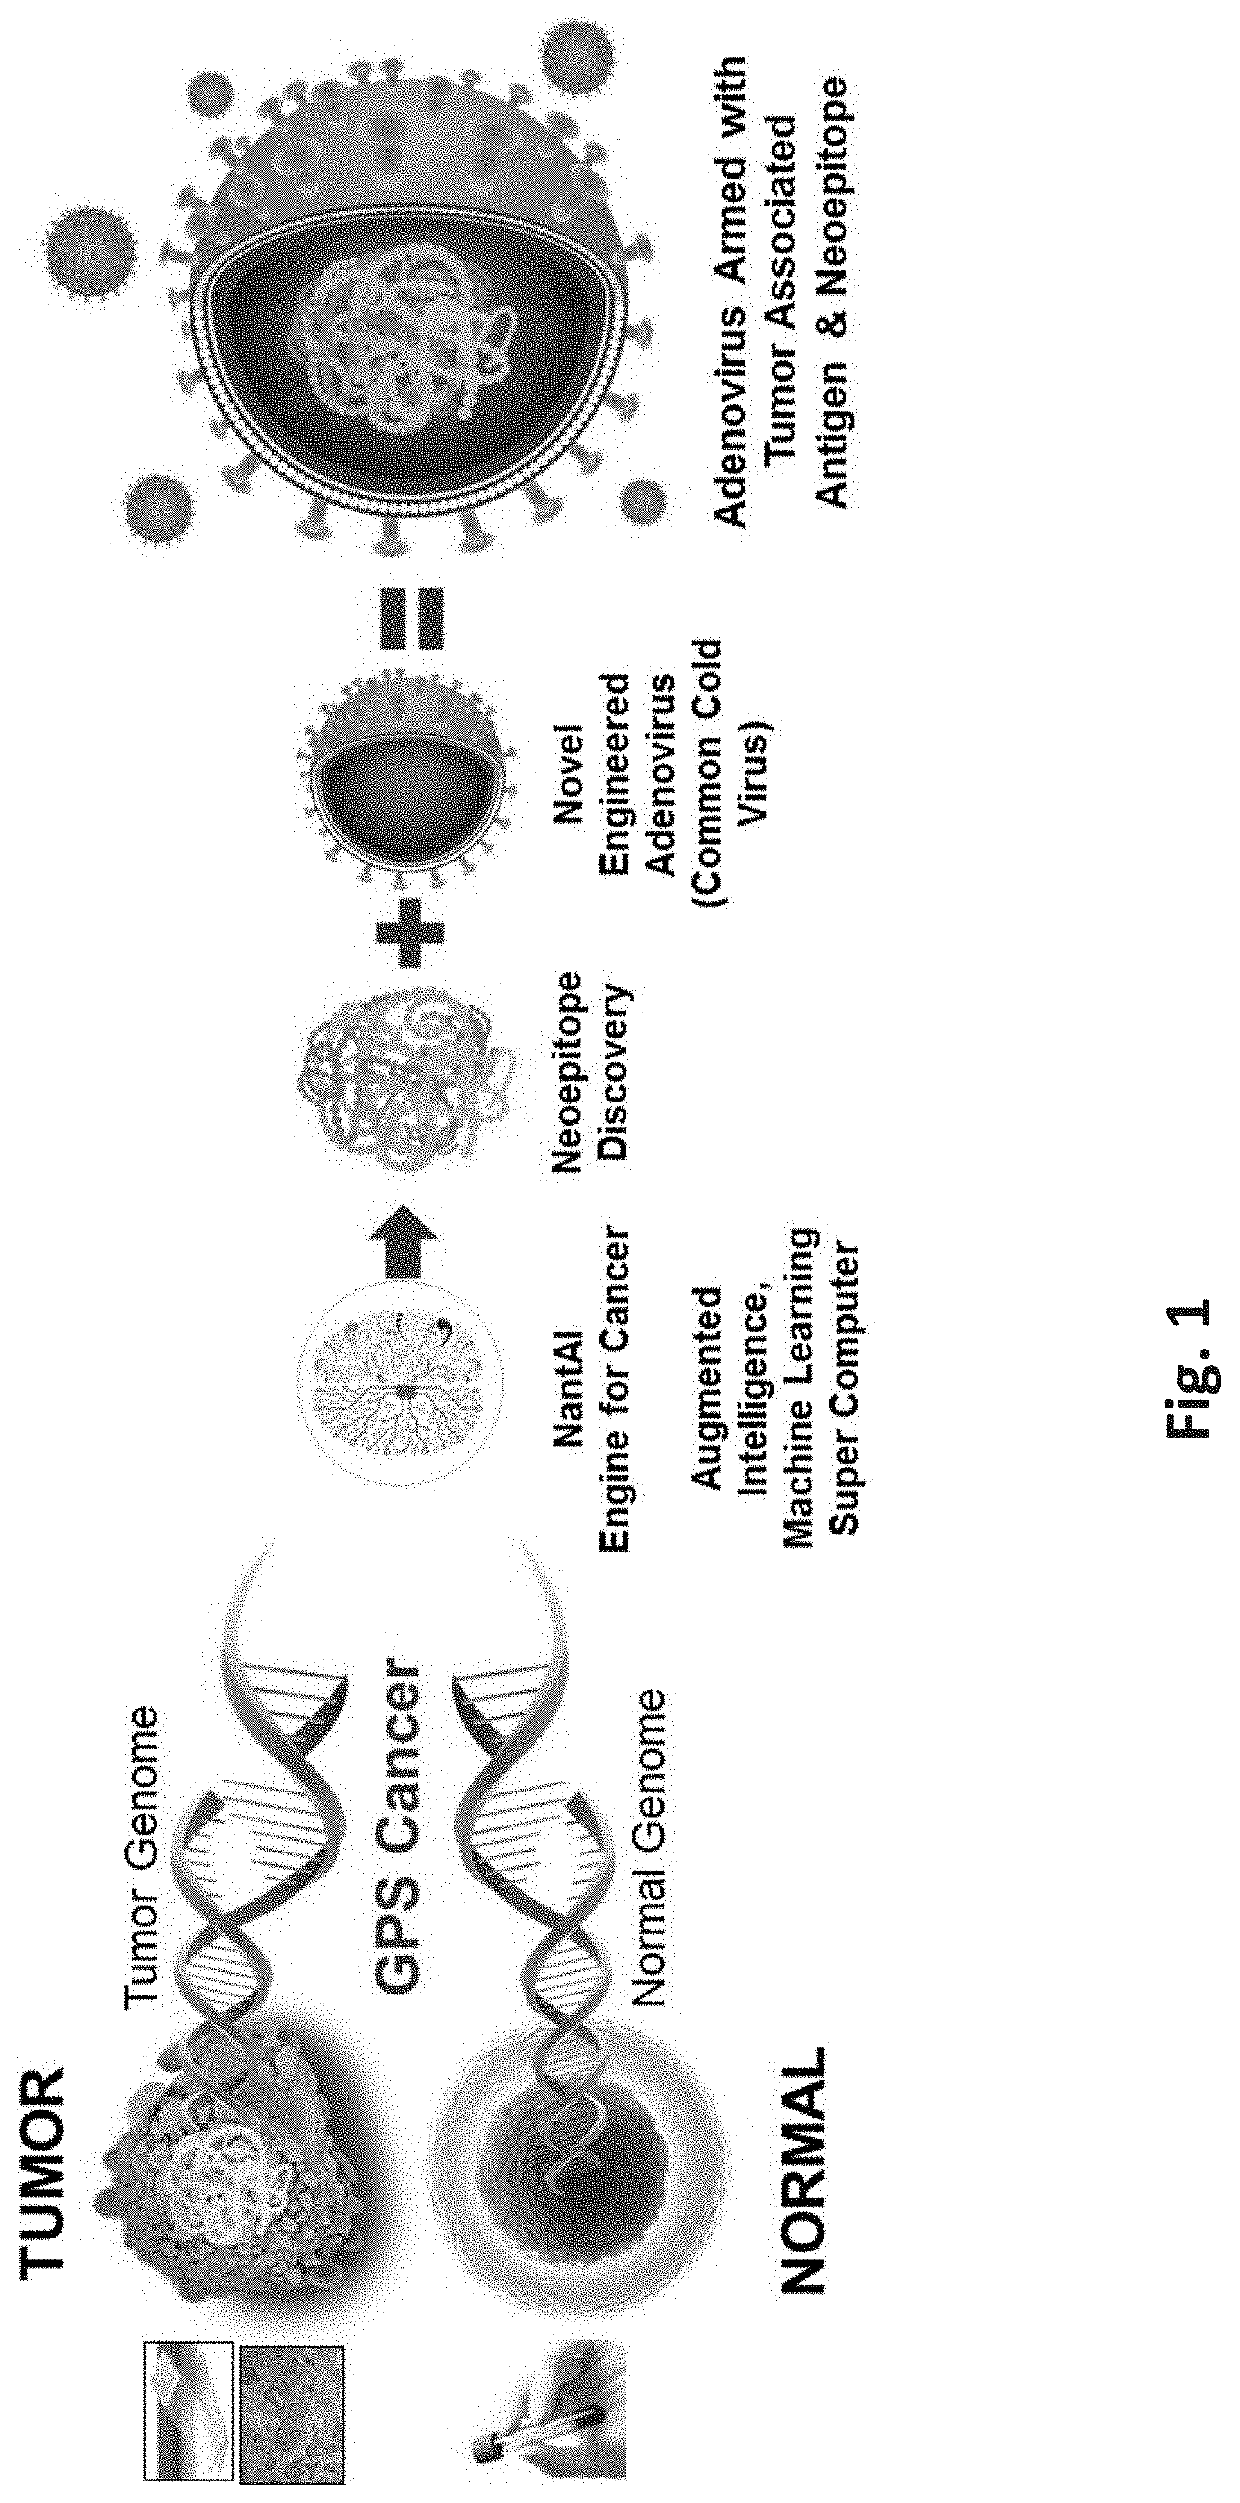 Neoepitope vaccine and immune stimulant combinations and methods